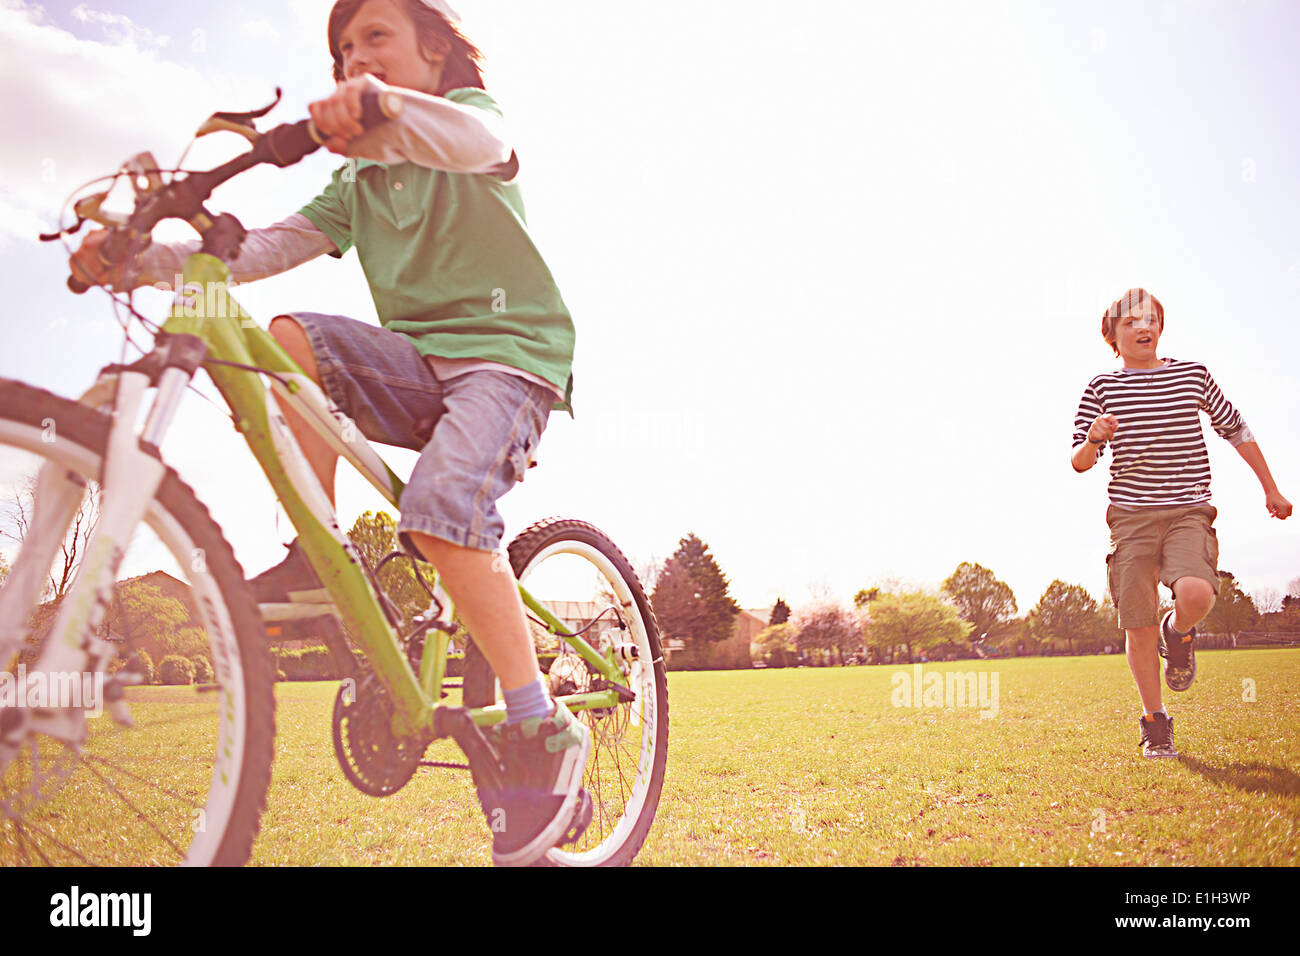 Boys running and cycling on playing field Stock Photo